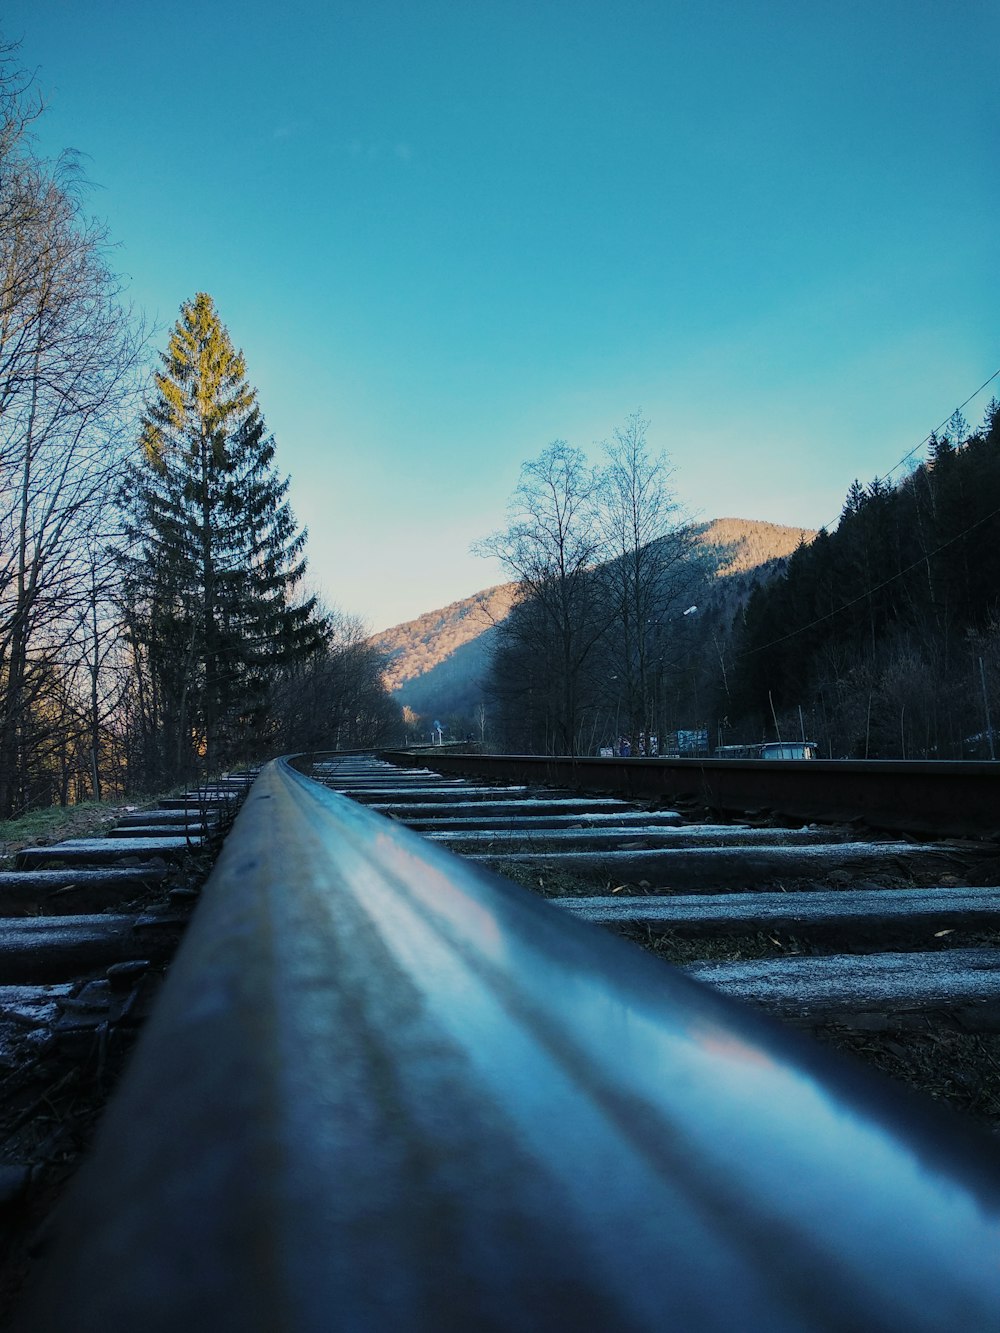 train tracks with trees and mountain in the background